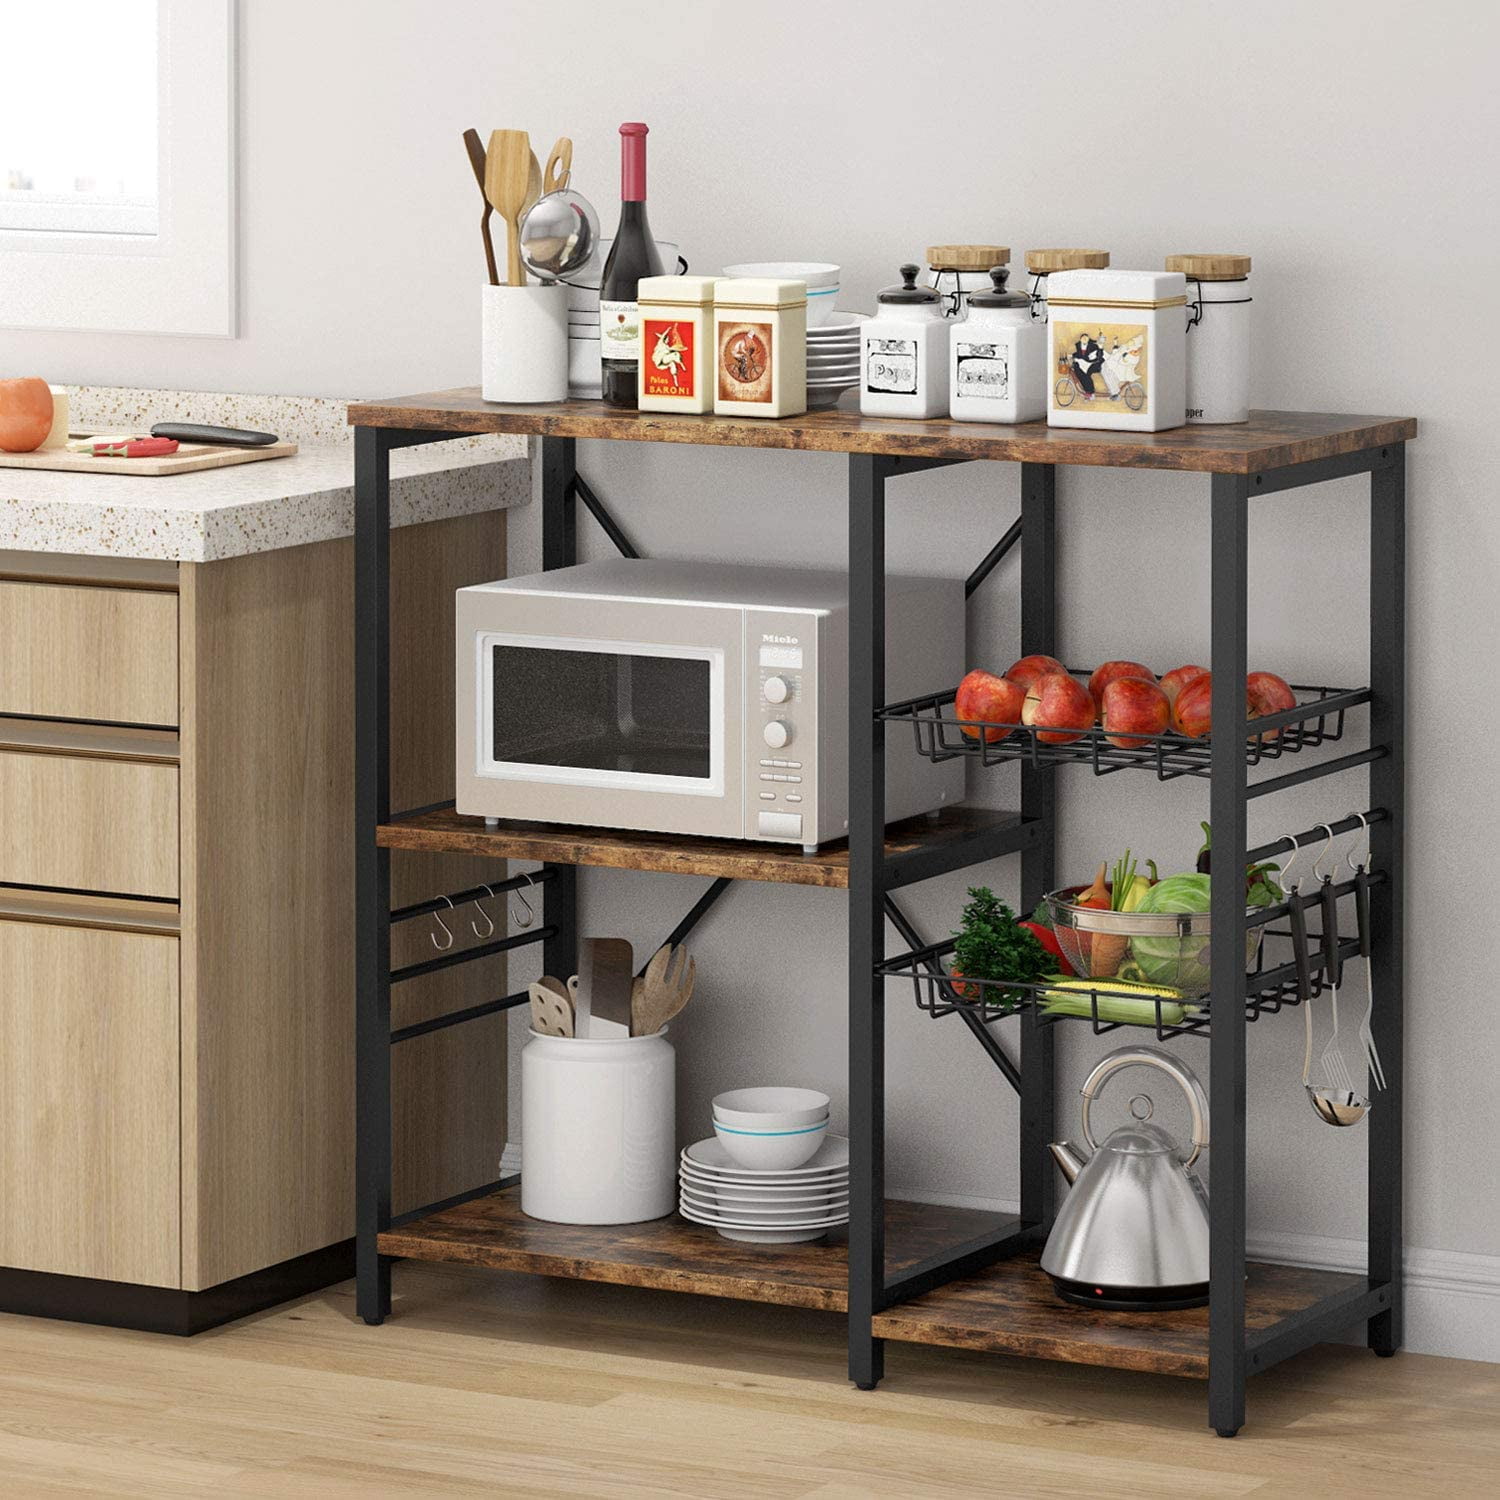 Tribesigns Kitchen Baker’s Rack with Storage Shelves 8-Tier Microwave Oven Stand Coffee Bar with Hutch Utility Storage Shelf Standing Spice Rack for Home Kitchen